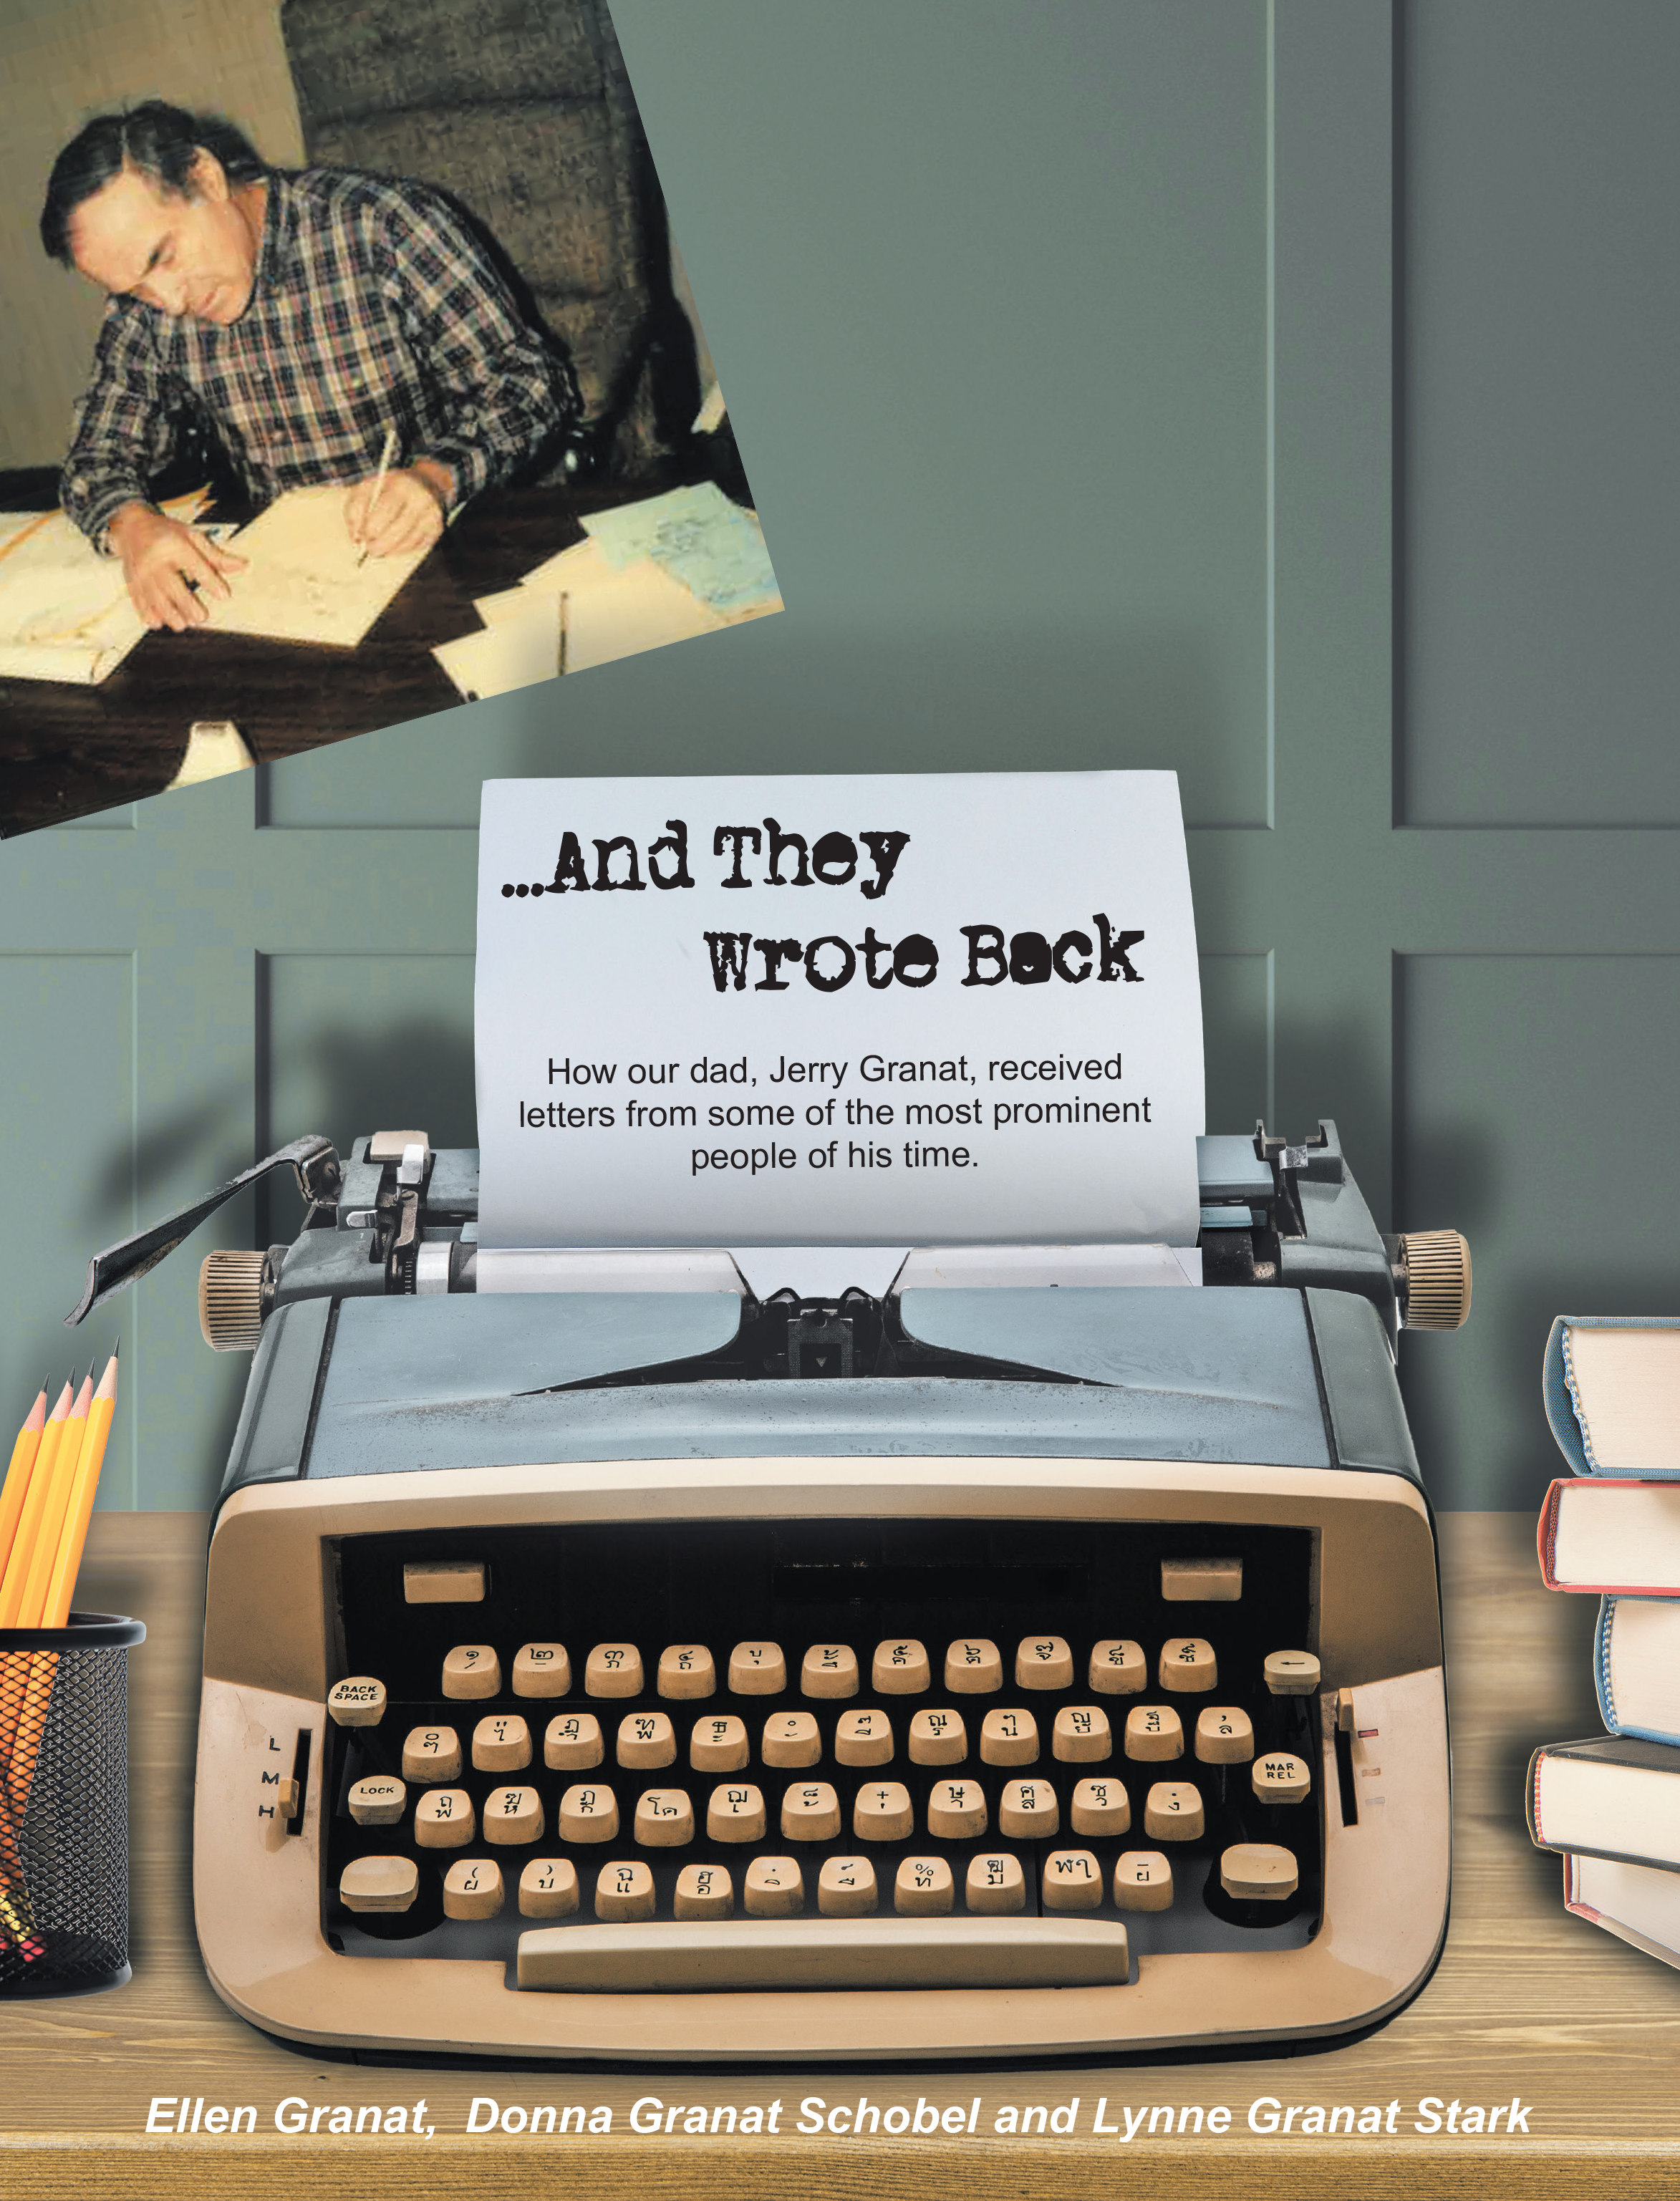 Authors Ellen Granat, Donna Granat Schobel, and Lynne Granat Stark’s New Book, “...And They Wrote Back,” Documents One Man’s Countless Letters to Notable Figures